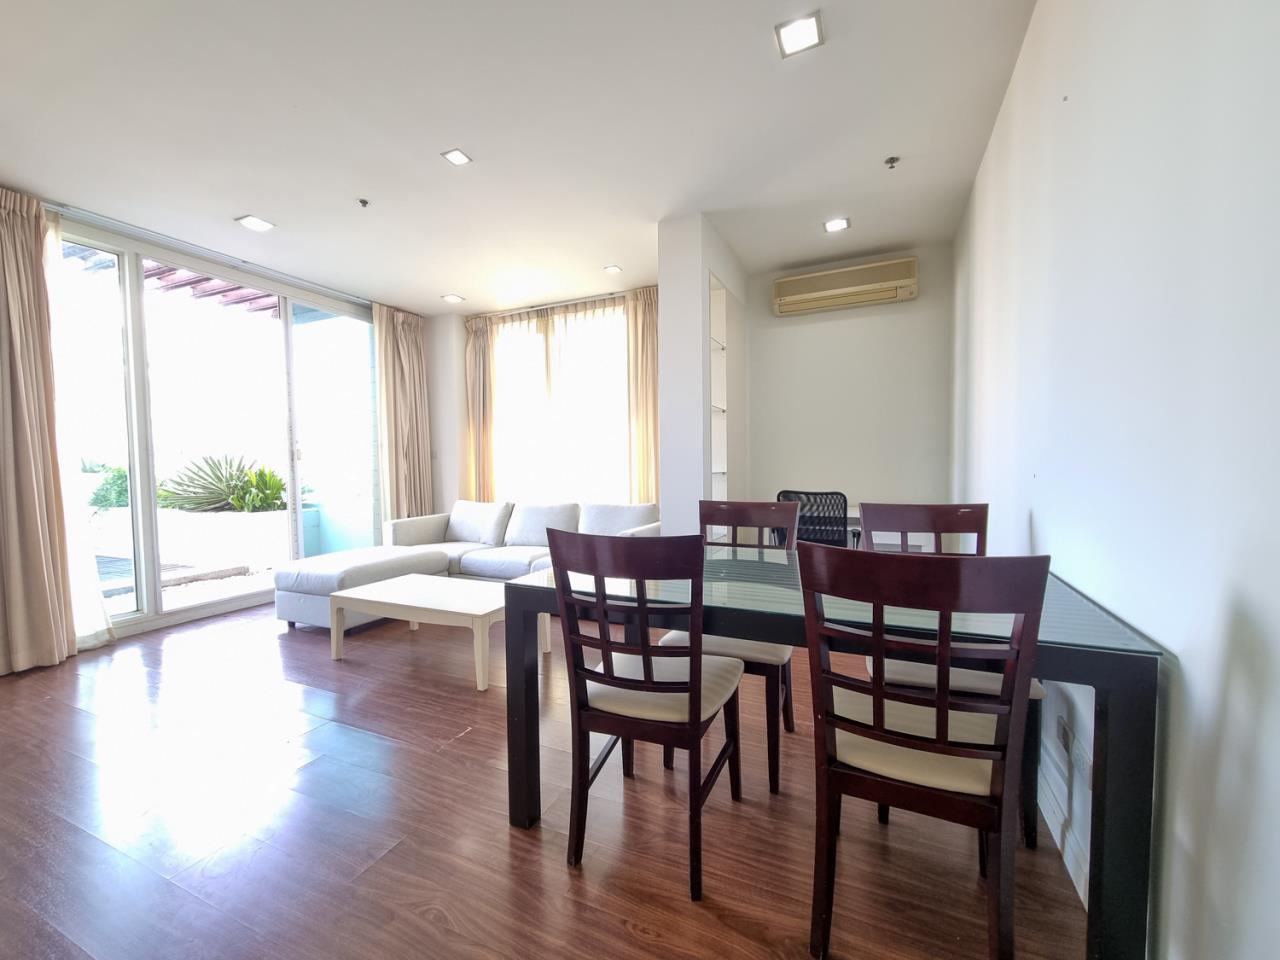 Japanthai Property Agency's *Siri Residence* Huge terrace rare 110sqm 2bed in Phrom Phong area  (5 mins walk to BTS PhromPhong)* 6